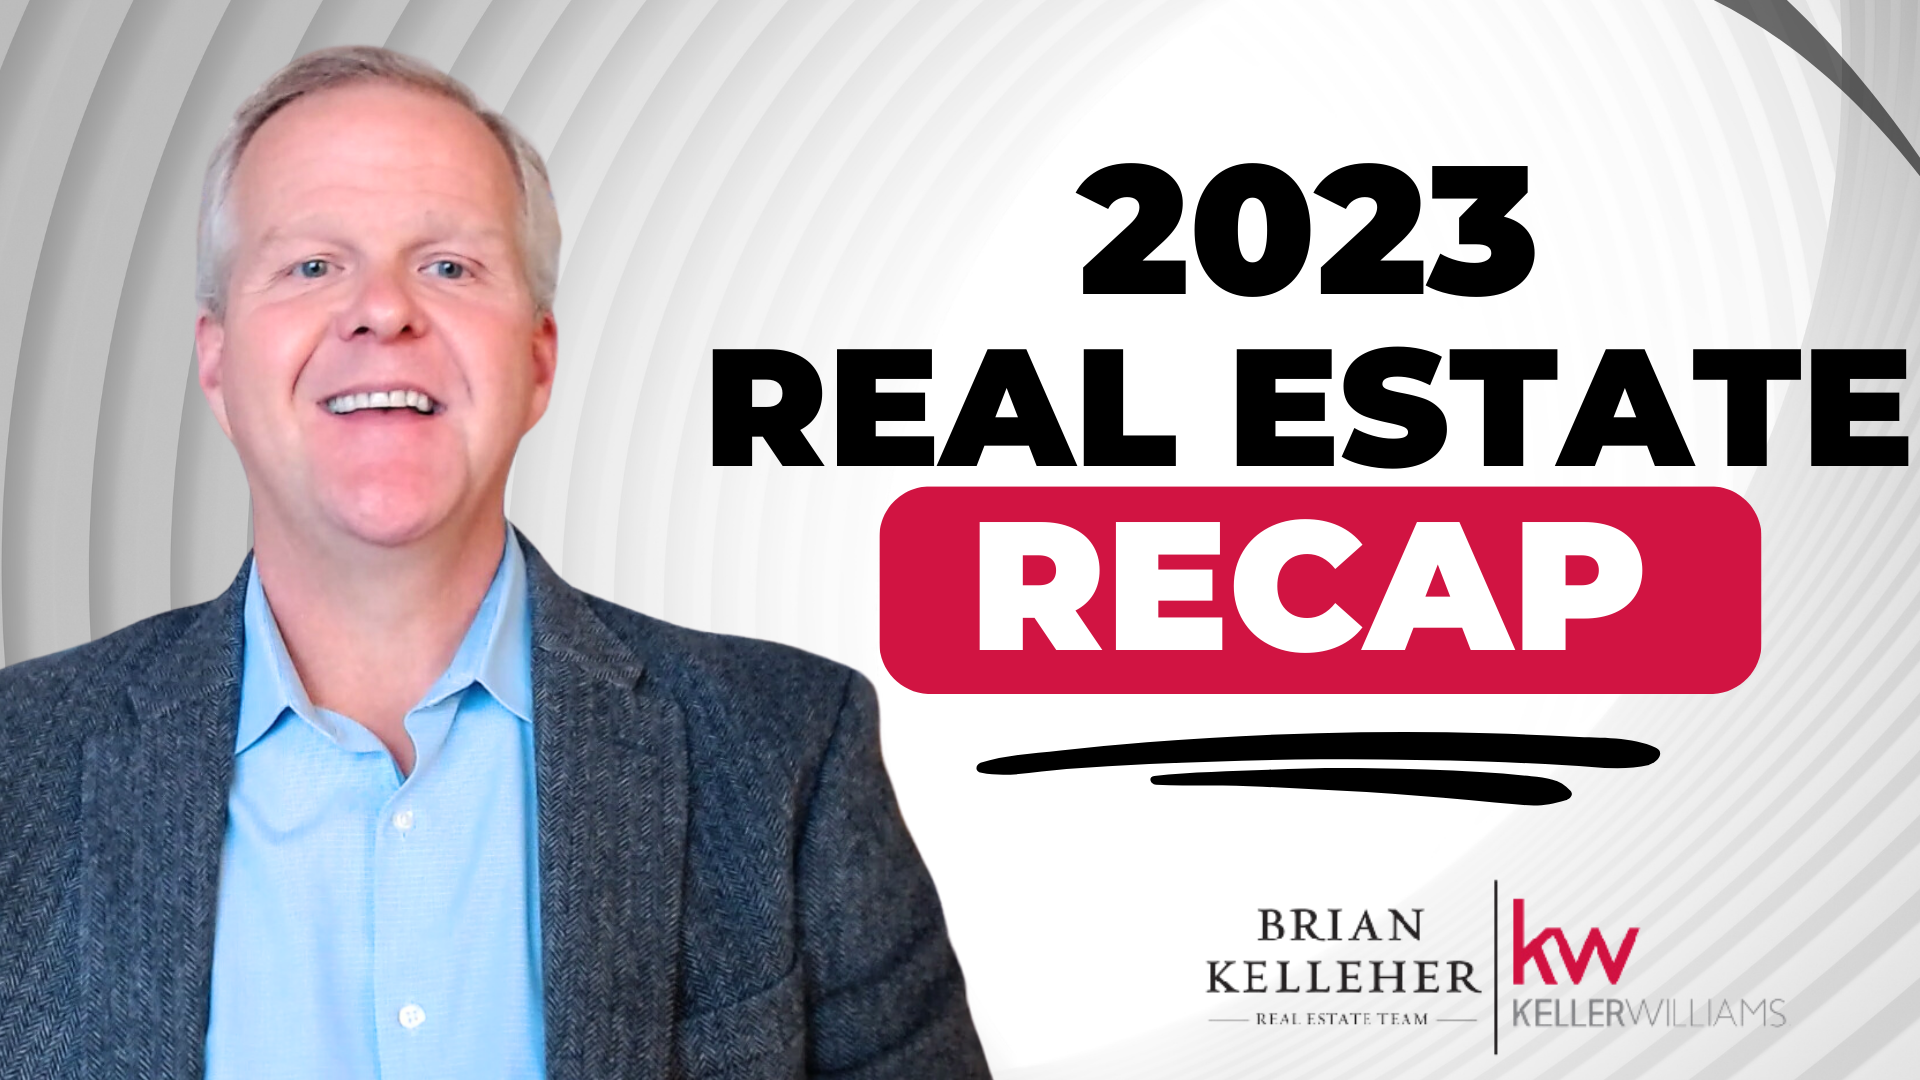 2023 Real Estate Trends: What You Need to Know Before Making Your Move